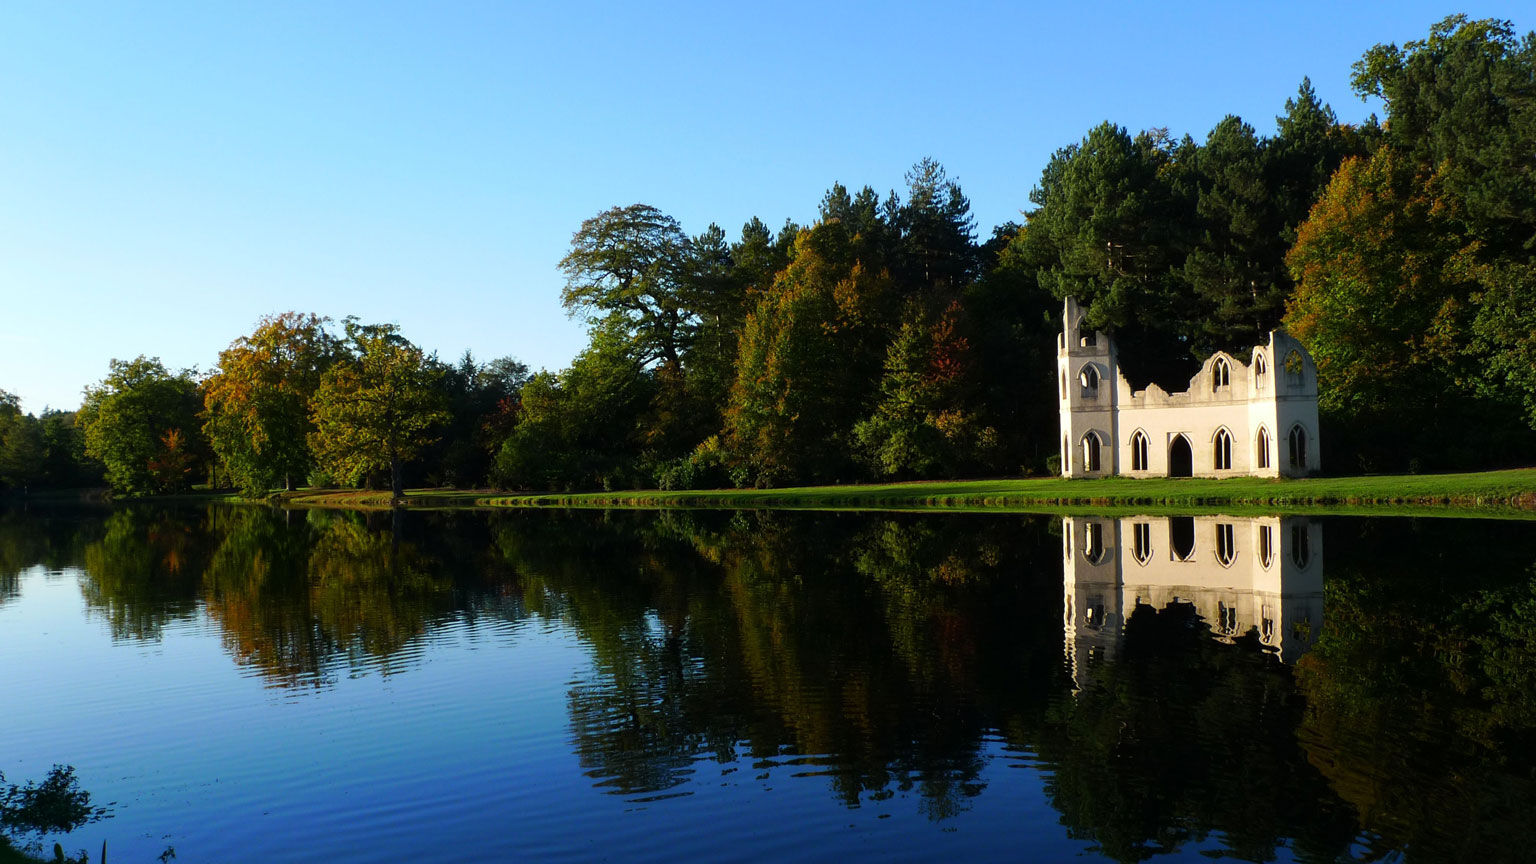 A peaceful view across the water of Painshill's ruined abbey, courtesy of Fred Holmes (Painshill)